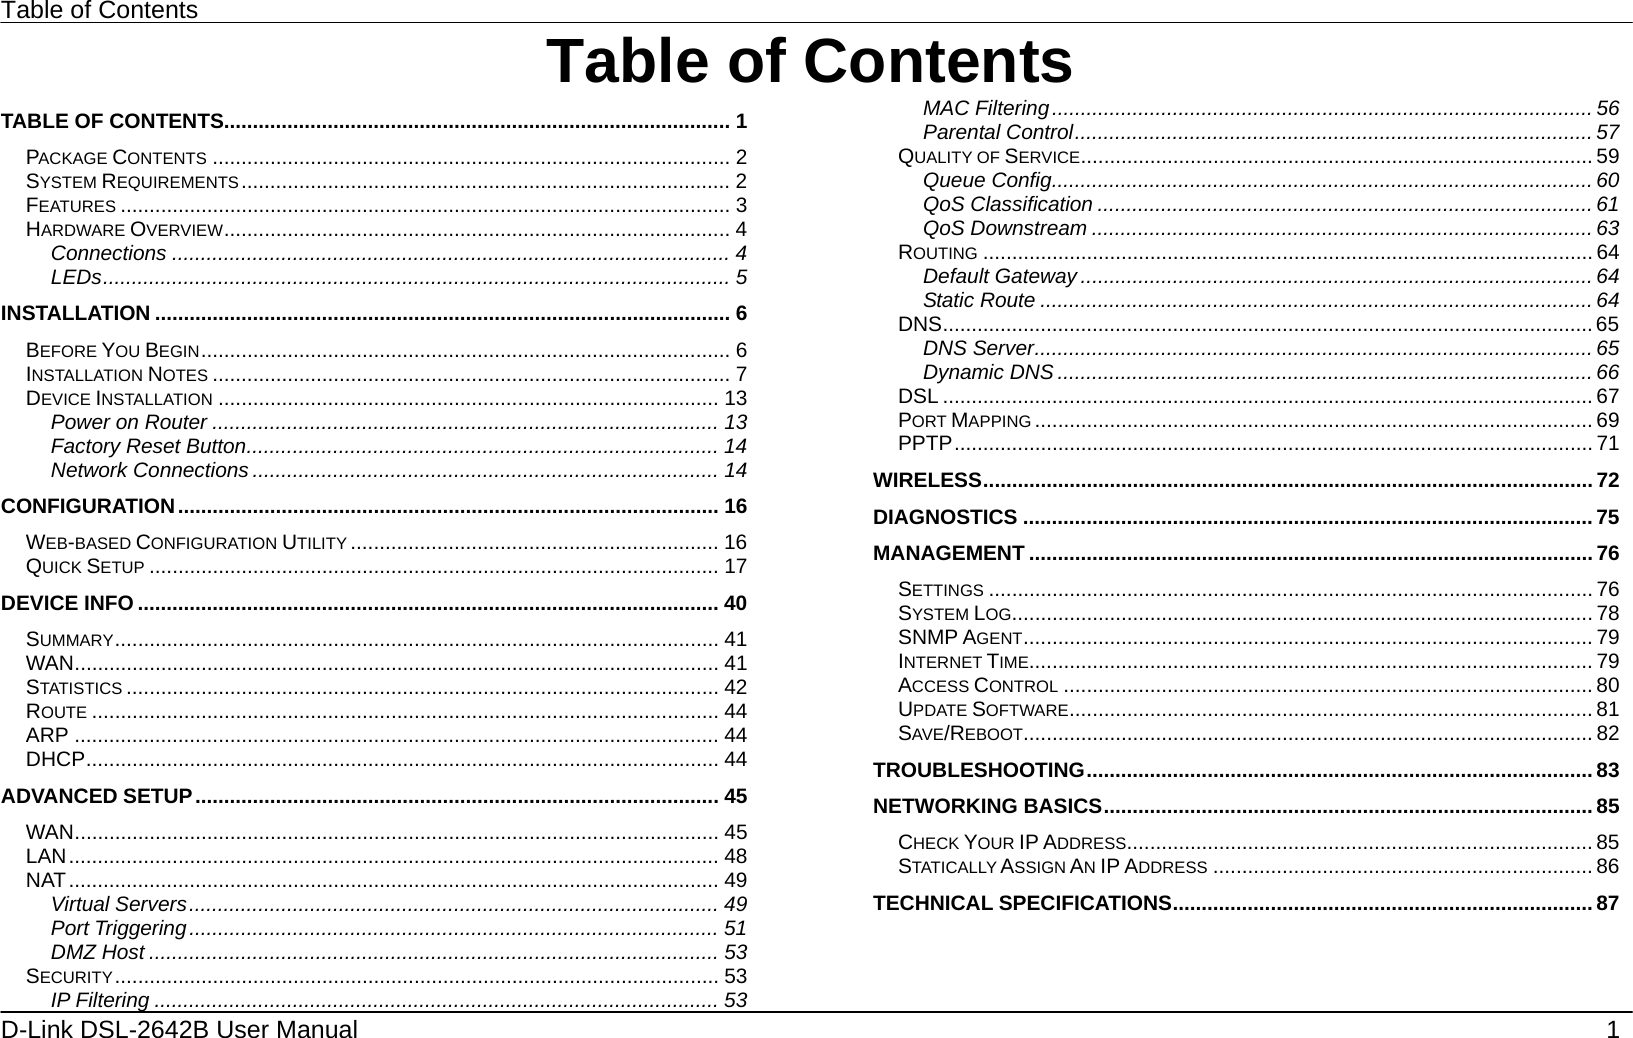 Table of Contents 1 D-Link DSL-2642B User Manual   Table of ContentsTABLE OF CONTENTS........................................................................................ 1 PACKAGE CONTENTS .......................................................................................... 2 SYSTEM REQUIREMENTS..................................................................................... 2 FEATURES .......................................................................................................... 3 HARDWARE OVERVIEW........................................................................................ 4 Connections ................................................................................................. 4 LEDs............................................................................................................. 5 INSTALLATION .................................................................................................... 6 BEFORE YOU BEGIN............................................................................................ 6 INSTALLATION NOTES .......................................................................................... 7 DEVICE INSTALLATION ....................................................................................... 13 Power on Router ........................................................................................ 13 Factory Reset Button.................................................................................. 14 Network Connections ................................................................................. 14 CONFIGURATION.............................................................................................. 16 WEB-BASED CONFIGURATION UTILITY ................................................................ 16 QUICK SETUP ................................................................................................... 17 DEVICE INFO ..................................................................................................... 40 SUMMARY......................................................................................................... 41 WAN................................................................................................................ 41 STATISTICS ....................................................................................................... 42 ROUTE ............................................................................................................. 44 ARP ................................................................................................................ 44 DHCP.............................................................................................................. 44 ADVANCED SETUP........................................................................................... 45 WAN................................................................................................................ 45 LAN................................................................................................................. 48 NAT................................................................................................................. 49 Virtual Servers............................................................................................ 49 Port Triggering............................................................................................ 51 DMZ Host ................................................................................................... 53 SECURITY......................................................................................................... 53 IP Filtering .................................................................................................. 53 MAC Filtering.............................................................................................. 56 Parental Control.......................................................................................... 57 QUALITY OF SERVICE......................................................................................... 59 Queue Config.............................................................................................. 60 QoS Classification ...................................................................................... 61 QoS Downstream ....................................................................................... 63 ROUTING .......................................................................................................... 64 Default Gateway ......................................................................................... 64 Static Route ................................................................................................ 64 DNS................................................................................................................. 65 DNS Server.................................................................................................65 Dynamic DNS ............................................................................................. 66 DSL ................................................................................................................. 67 PORT MAPPING ................................................................................................. 69 PPTP............................................................................................................... 71 WIRELESS.......................................................................................................... 72 DIAGNOSTICS ...................................................................................................75 MANAGEMENT ..................................................................................................76 SETTINGS ......................................................................................................... 76 SYSTEM LOG..................................................................................................... 78 SNMP AGENT................................................................................................... 79 INTERNET TIME.................................................................................................. 79 ACCESS CONTROL ............................................................................................ 80 UPDATE SOFTWARE........................................................................................... 81 SAVE/REBOOT................................................................................................... 82 TROUBLESHOOTING........................................................................................ 83 NETWORKING BASICS..................................................................................... 85 CHECK YOUR IP ADDRESS................................................................................. 85 STATICALLY ASSIGN AN IP ADDRESS .................................................................. 86 TECHNICAL SPECIFICATIONS......................................................................... 87   